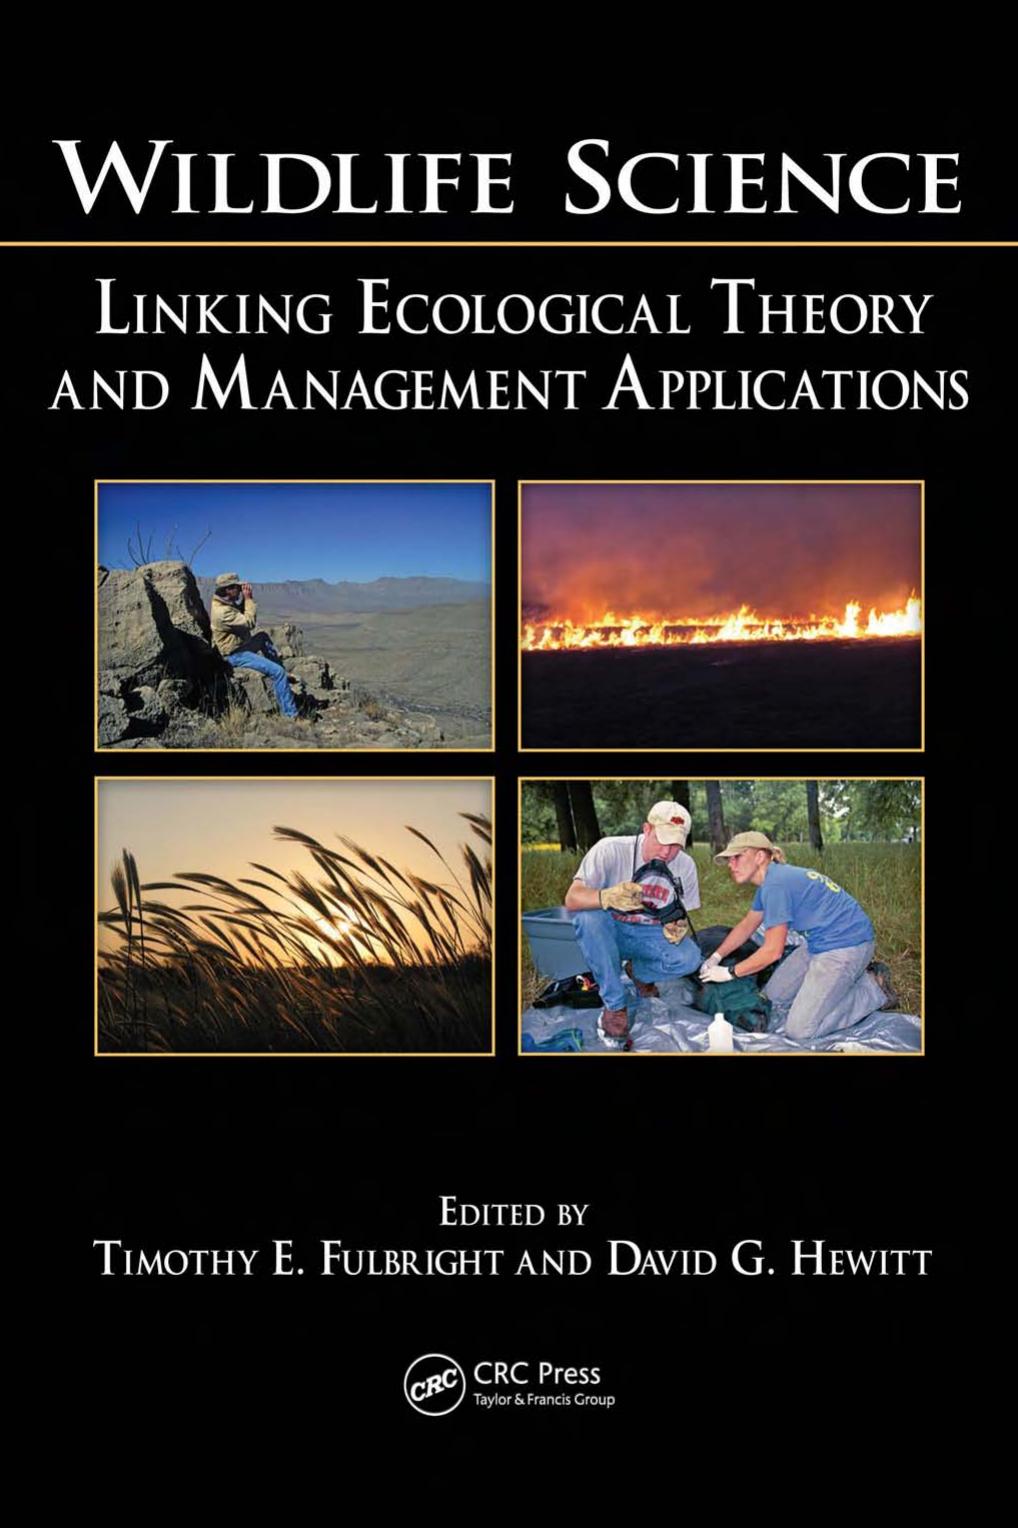 Wildlife Science: Linking Ecological Theory and Management Applications